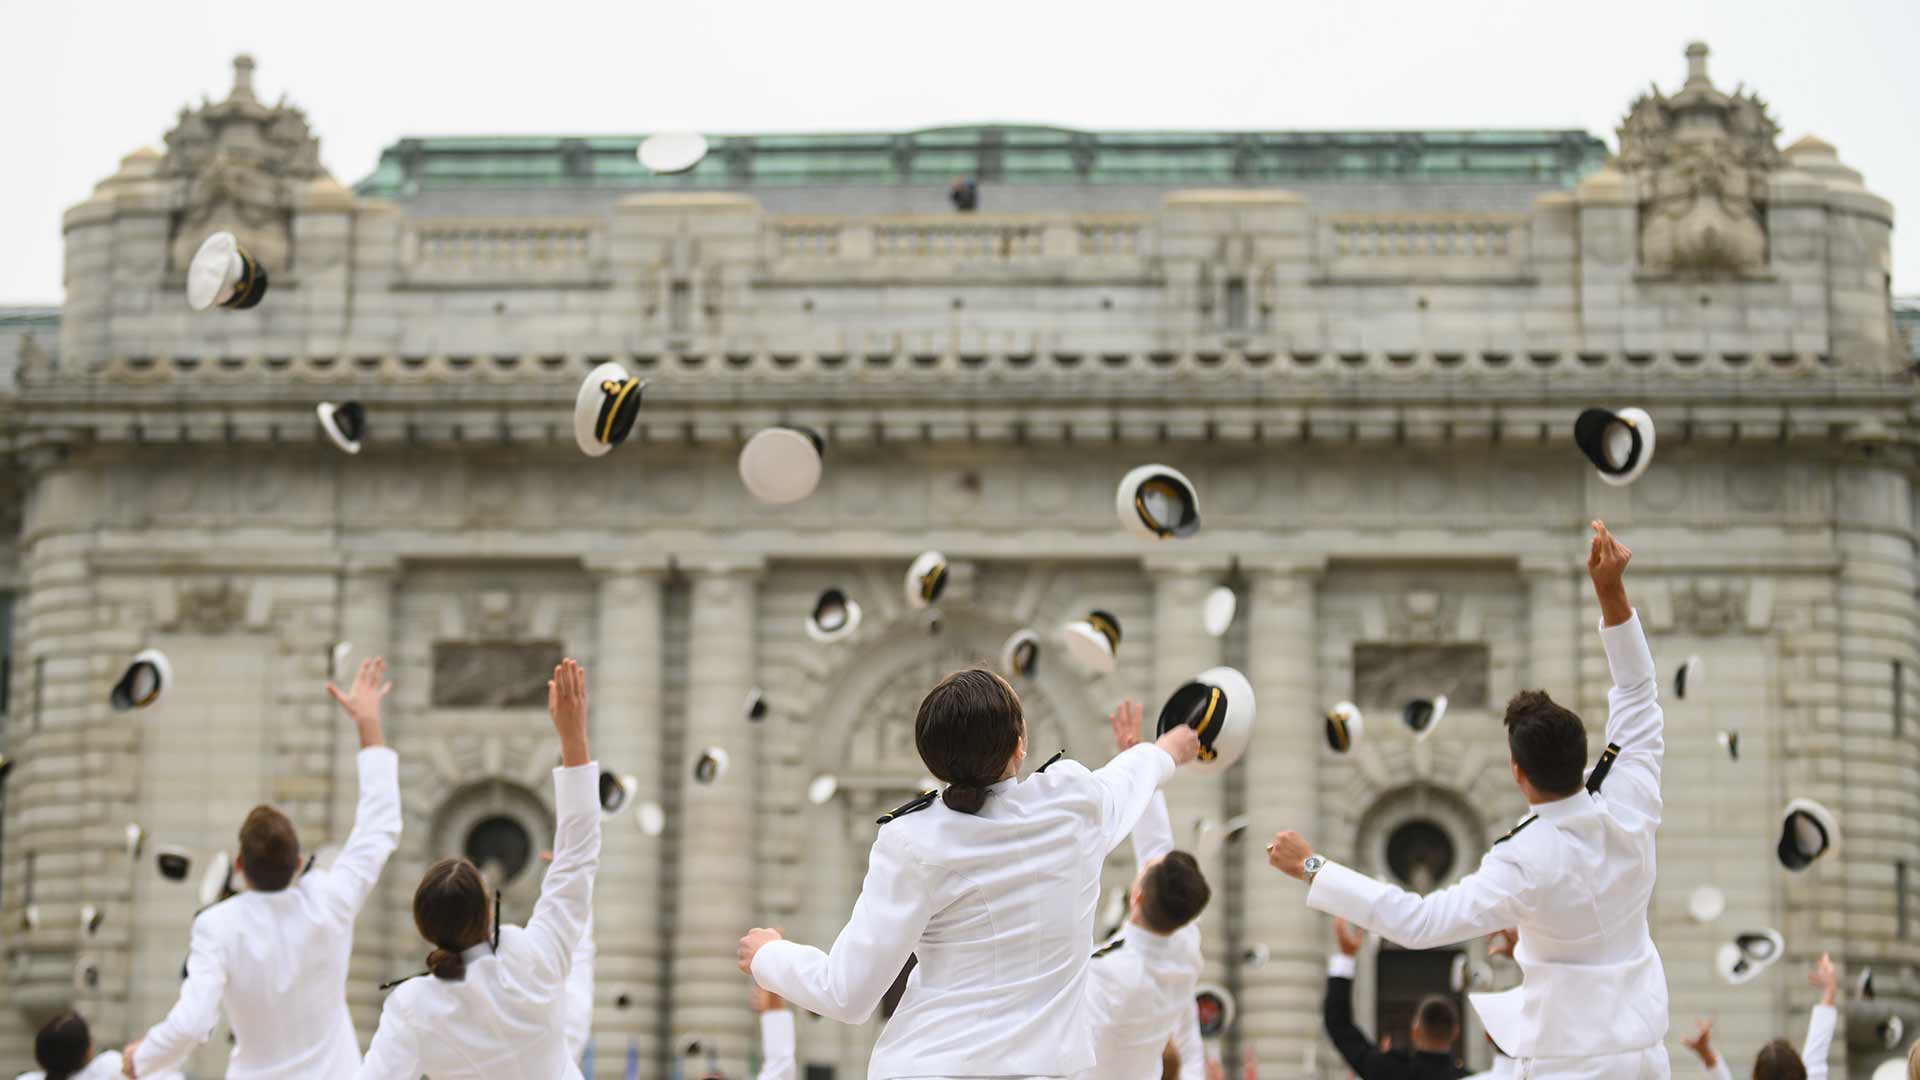 United States Naval Academy graduates toss their caps in celebration in the air.